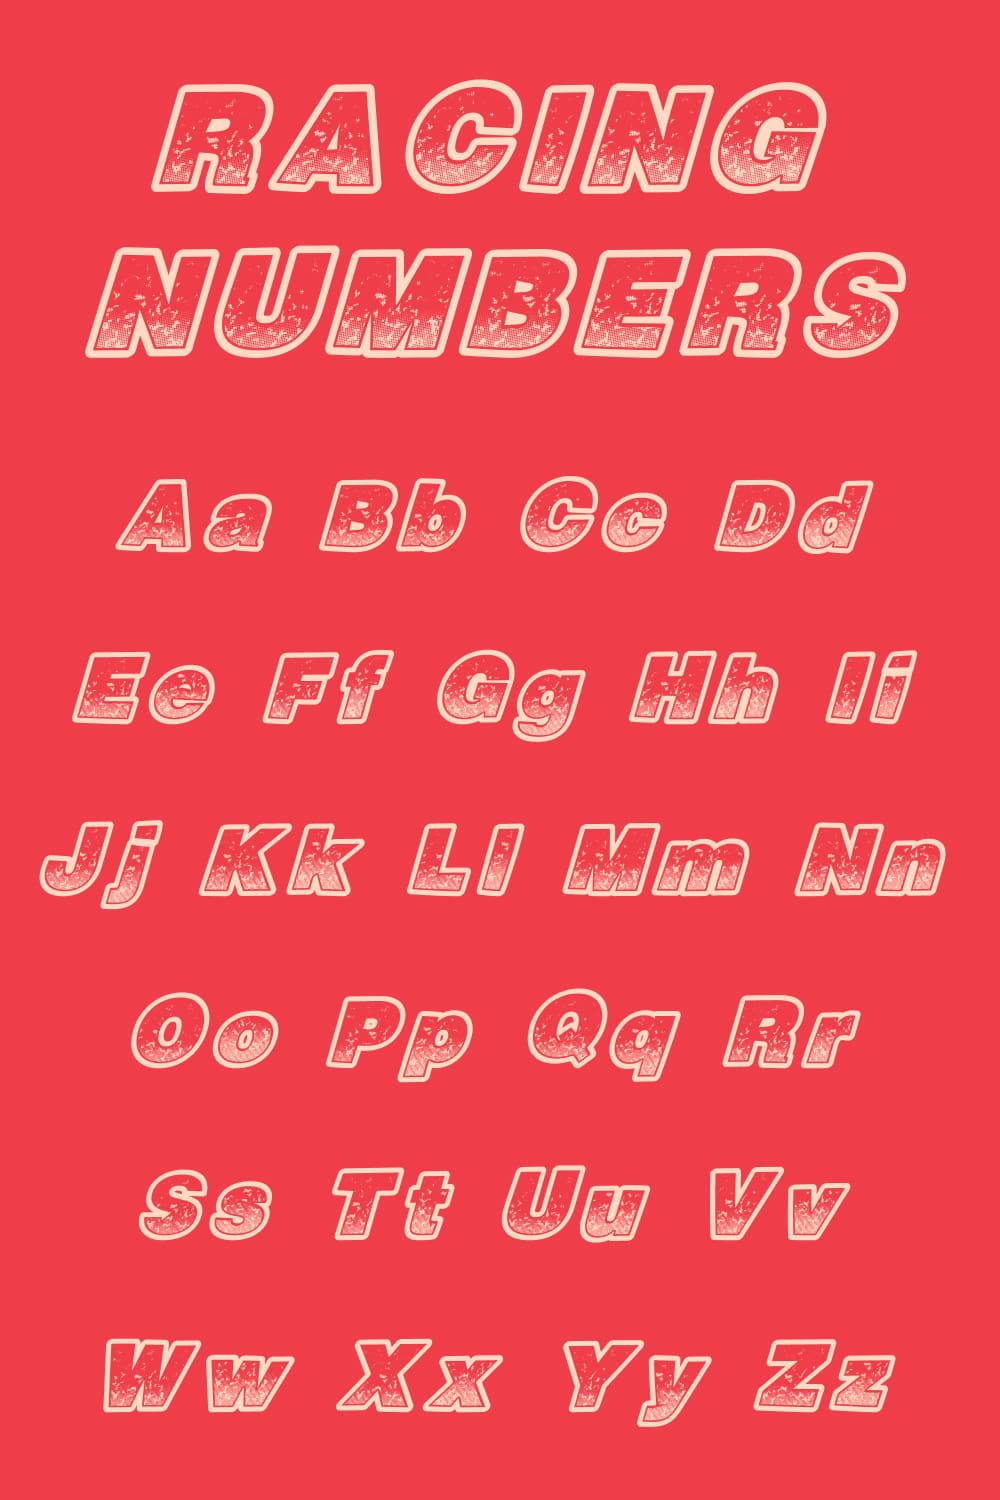 A calling font in 3D format on a red background.